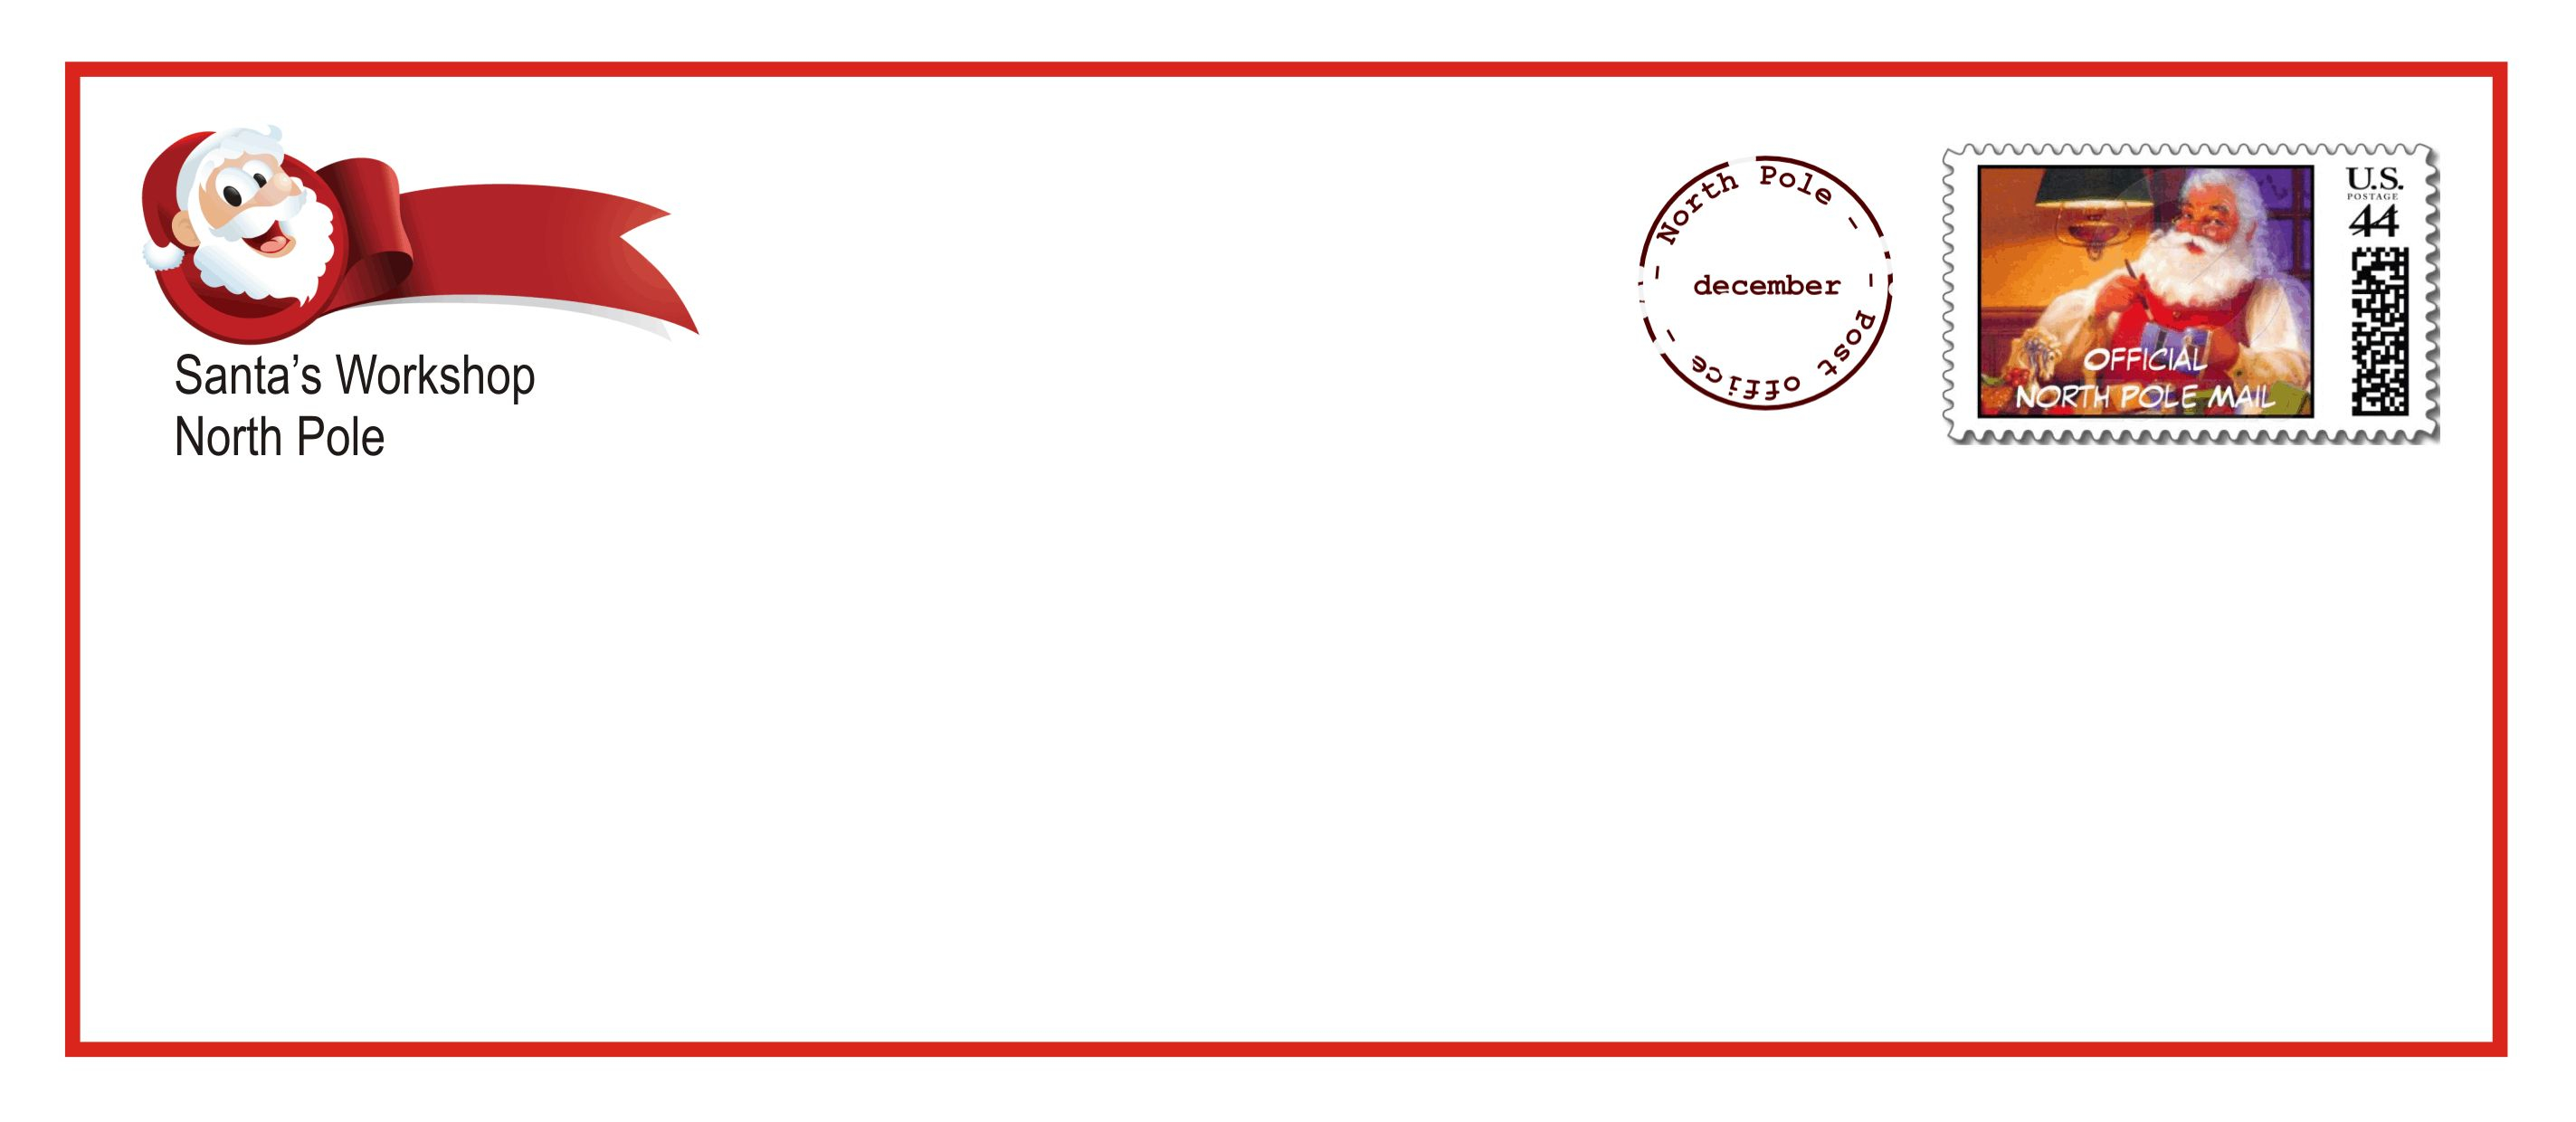 north pole letter template example-Printable Santa letter envelopes that e with the upgraded letter and Nice List certificate on Free Letter from Santa Claus 16-j